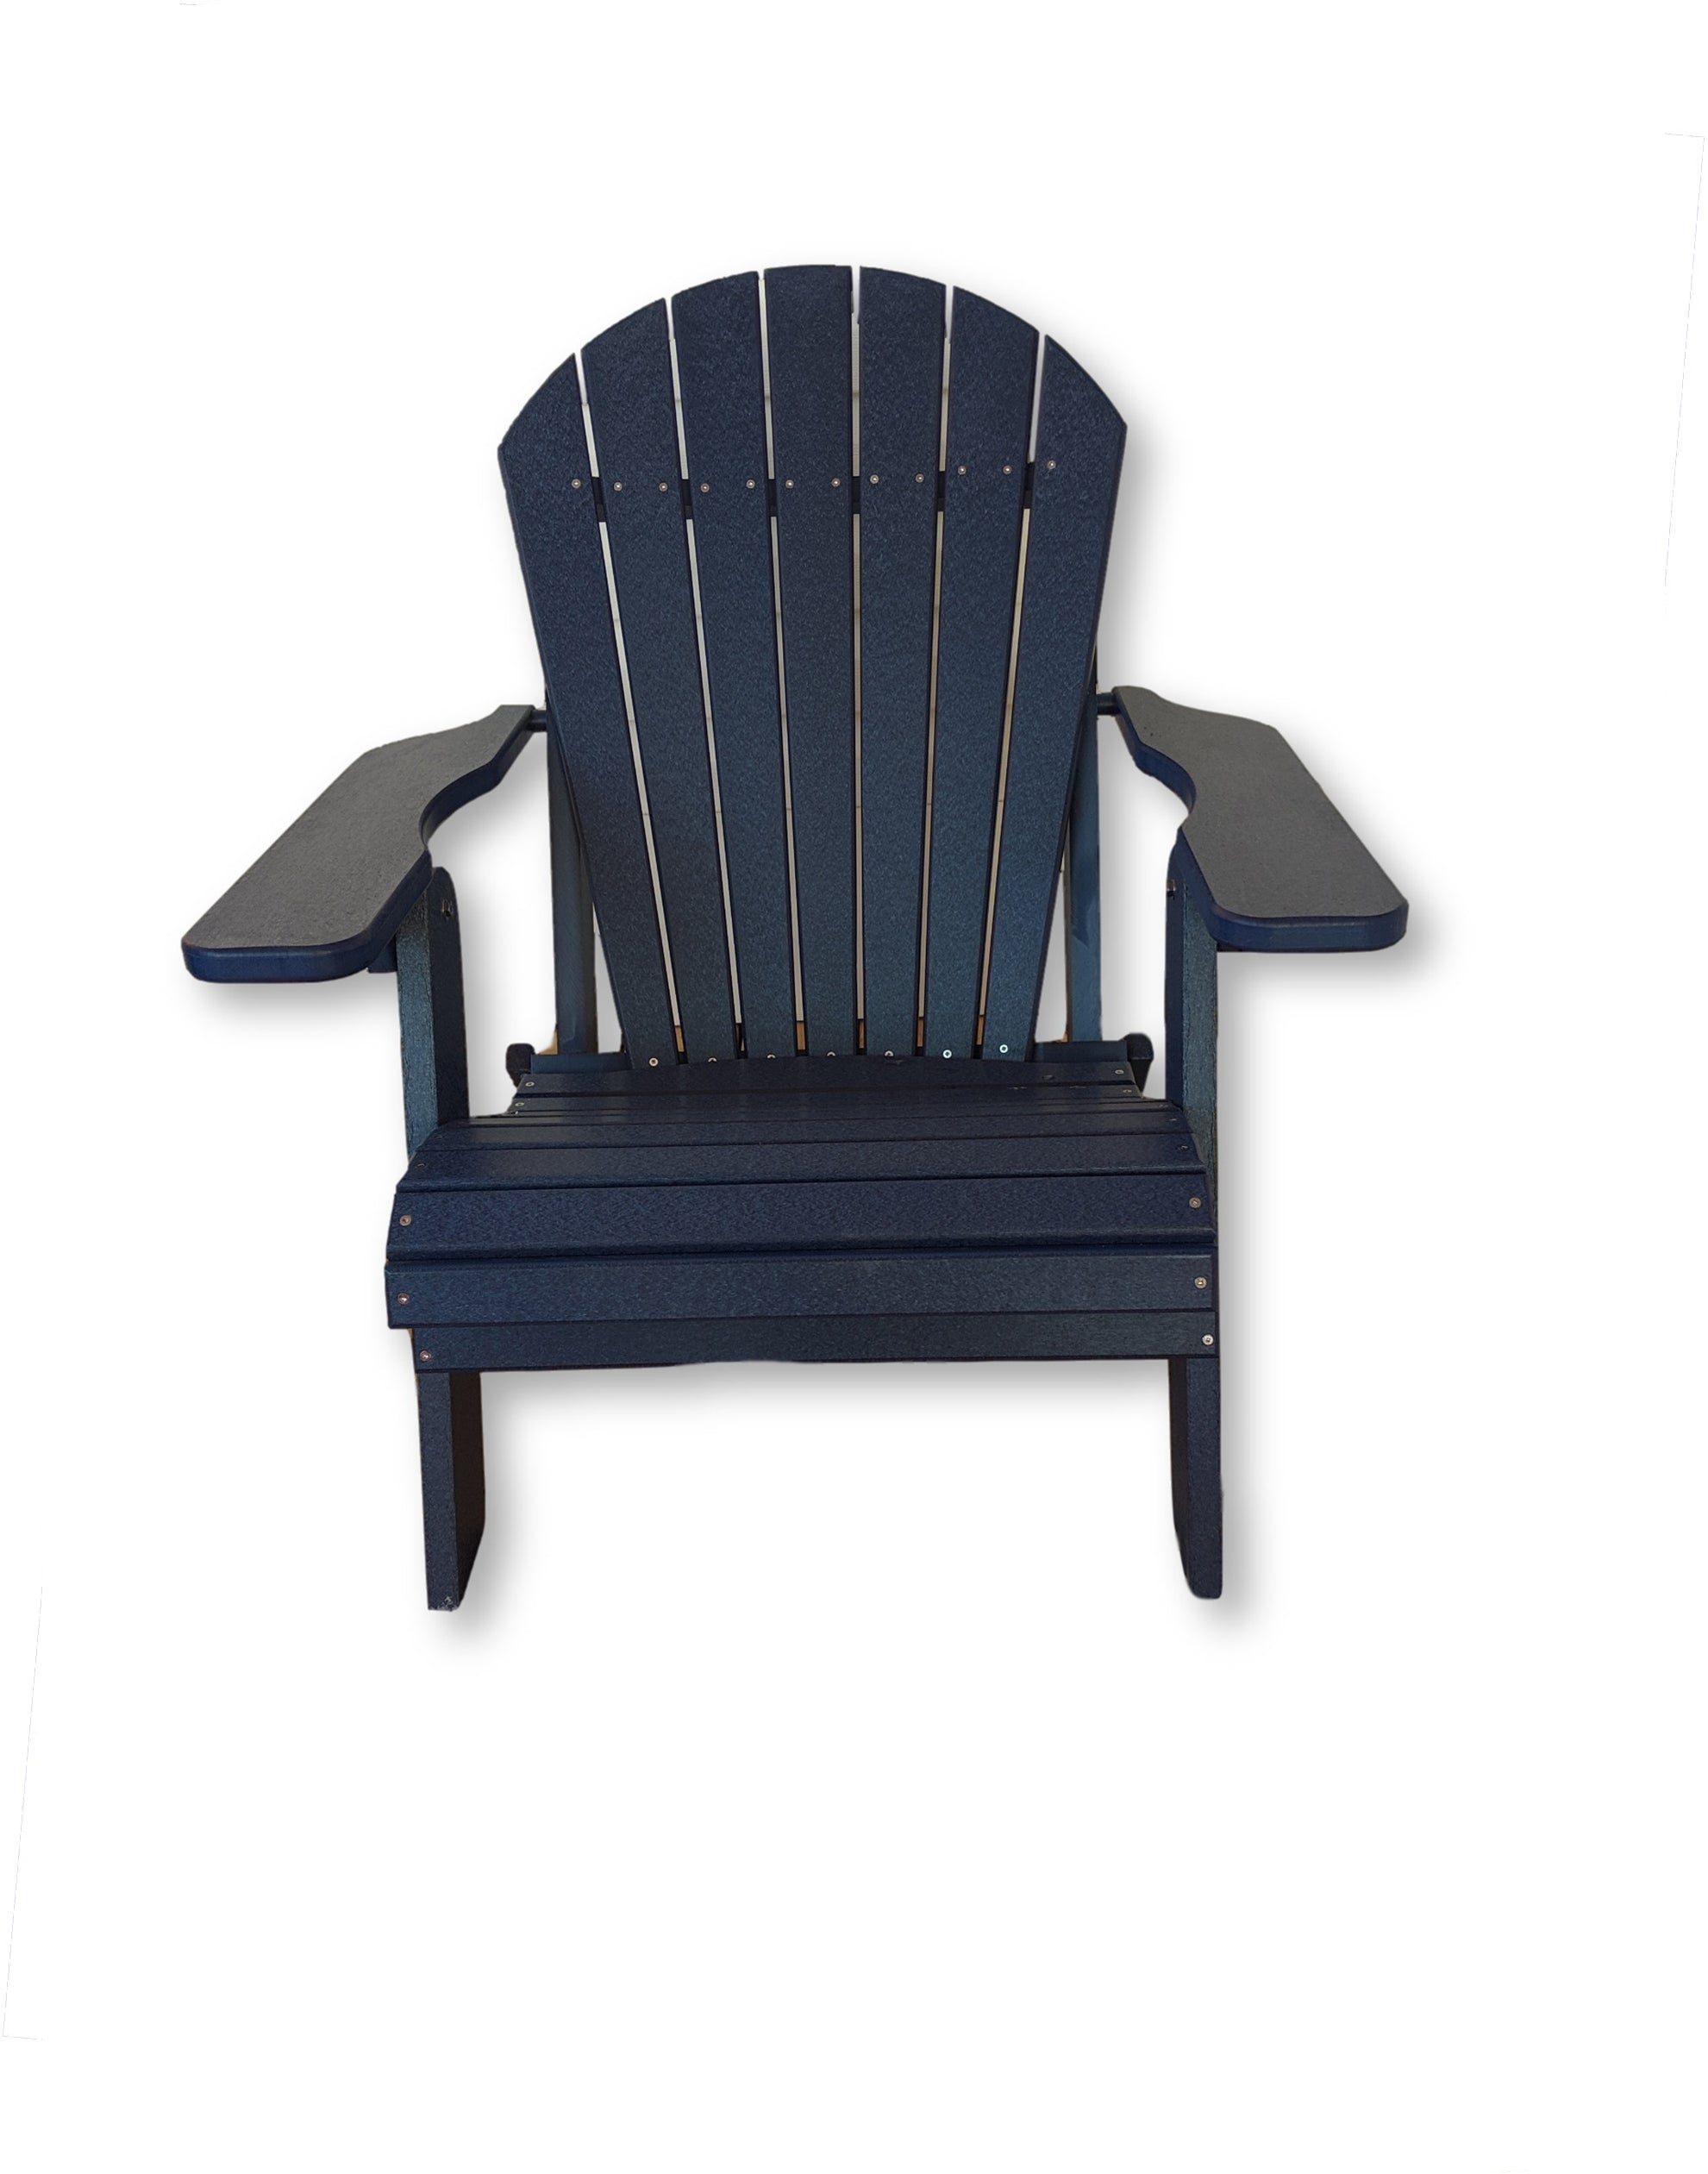 Patriot Blue Folding Adirondack Chair(No Cup Holders)